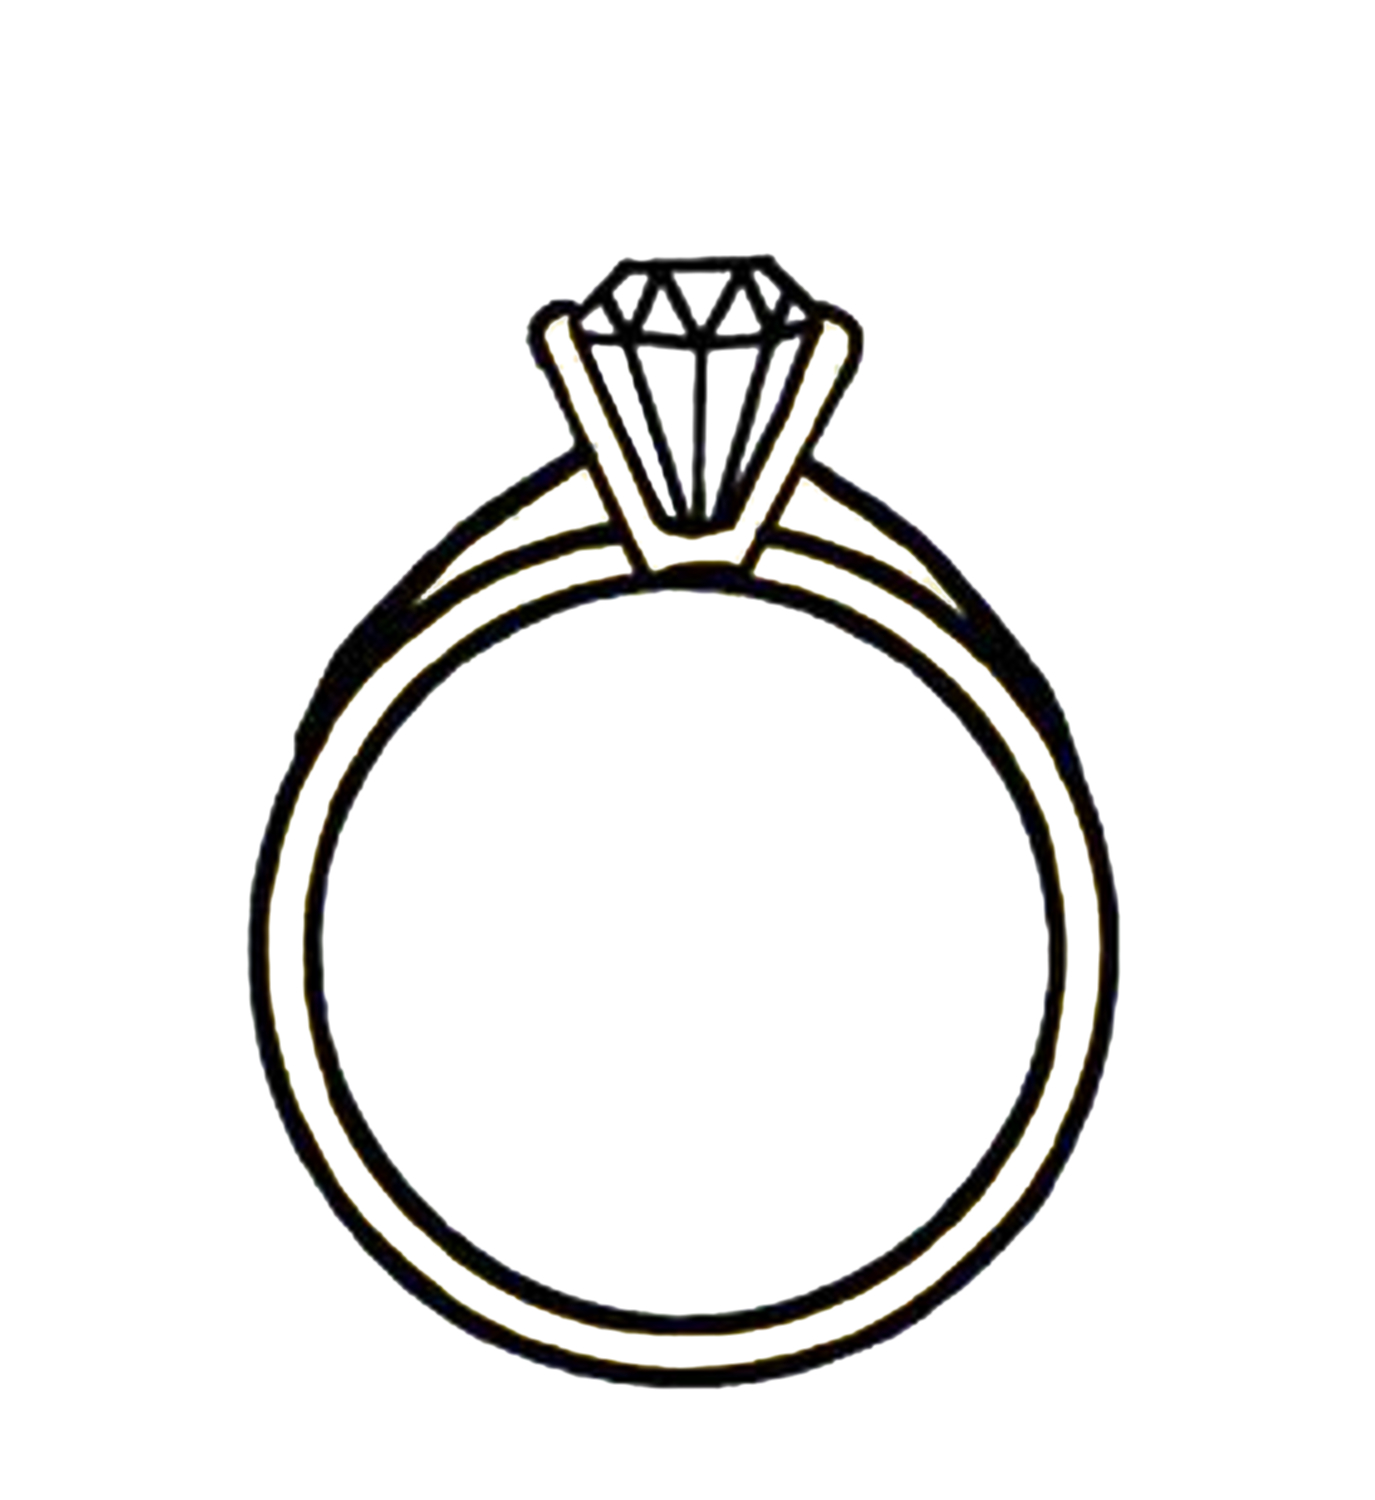 Diamond ring clipart free clipart images